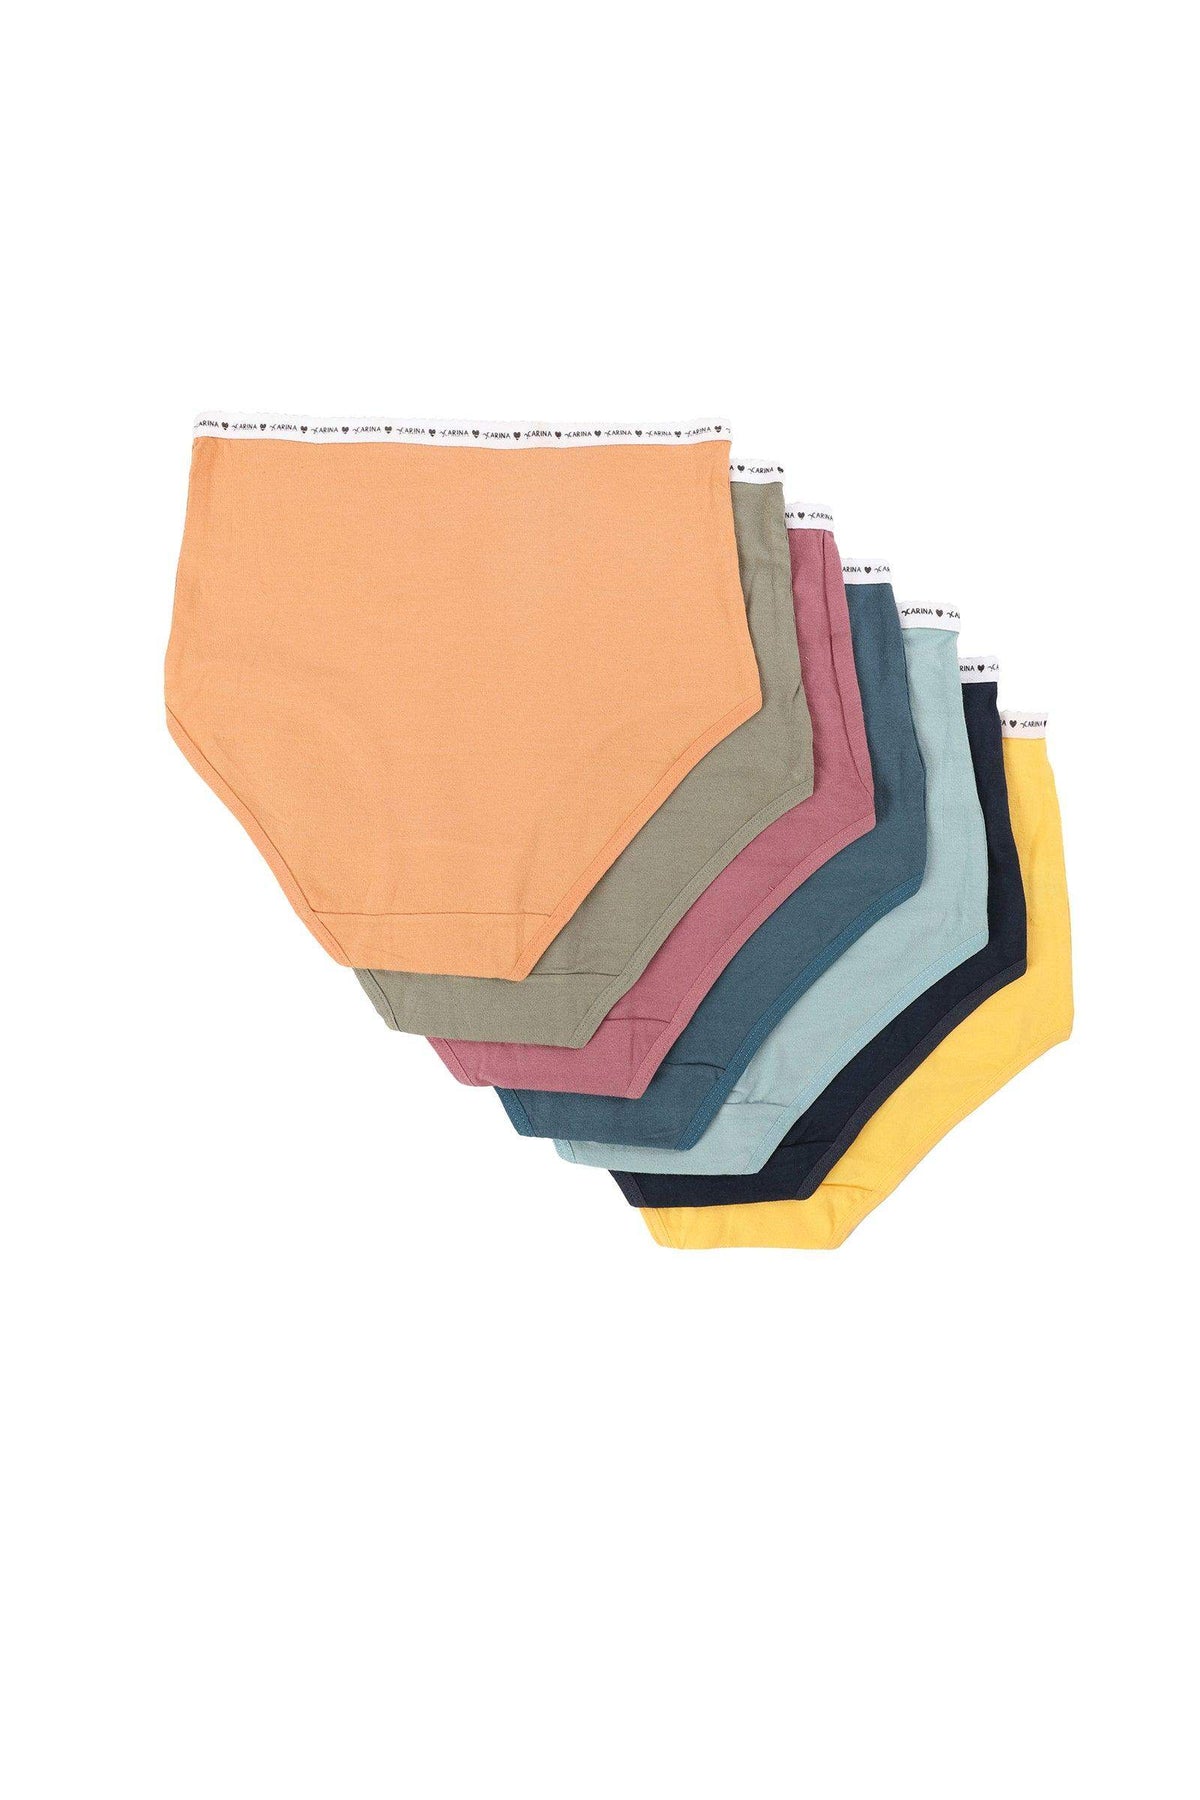 Pack of 7 Colored Full Brief - Carina - كارينا